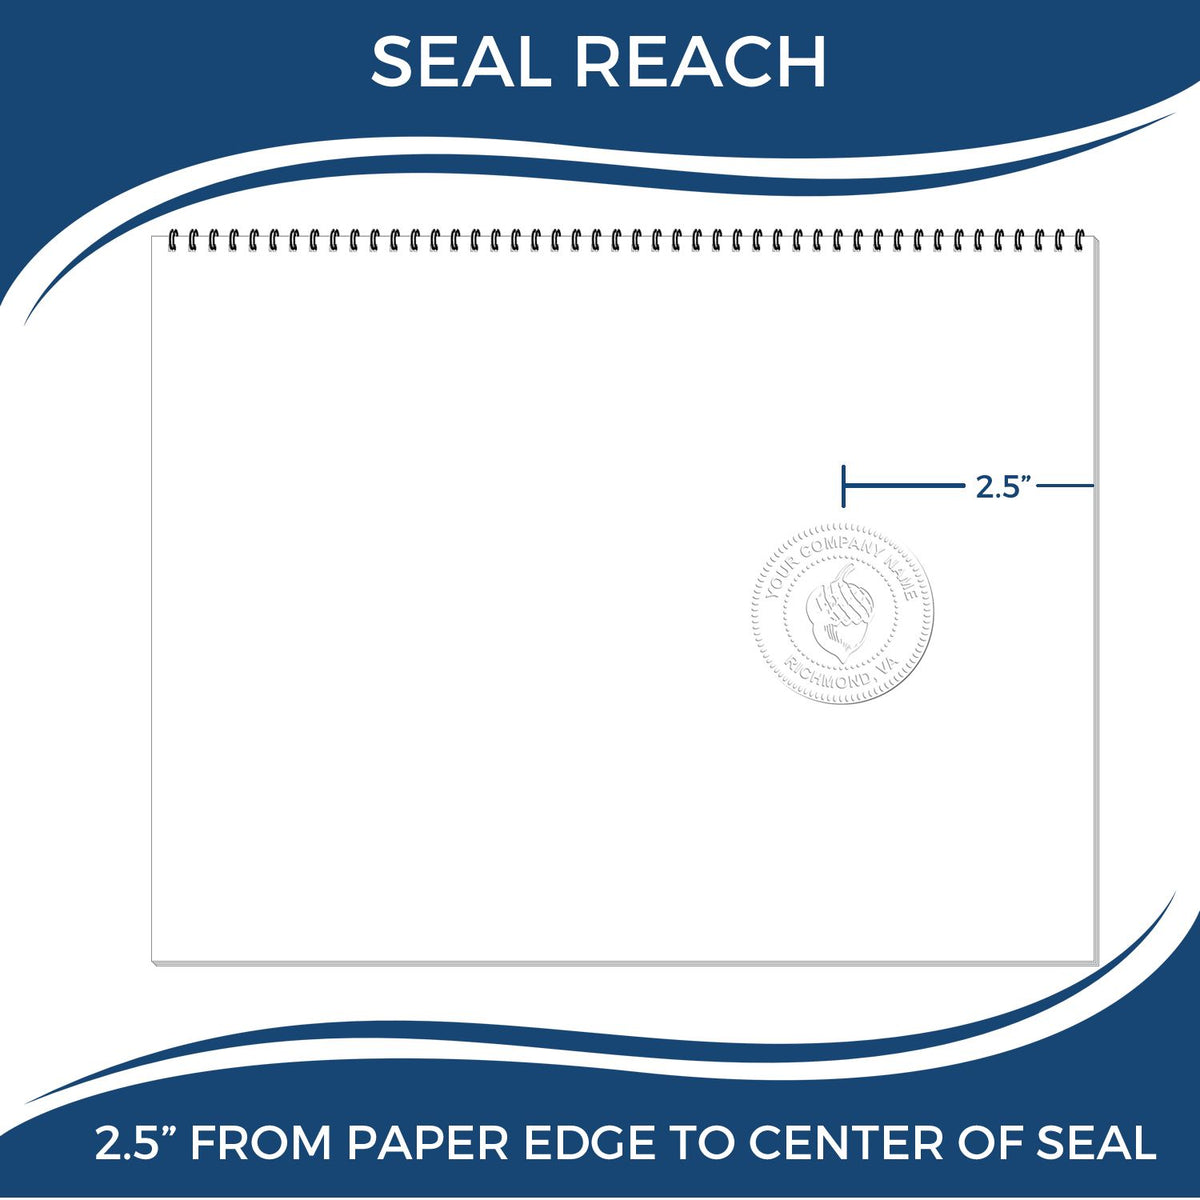 An infographic showing the seal reach which is represented by a ruler and a miniature seal image of the Long Reach Virginia Geology Seal